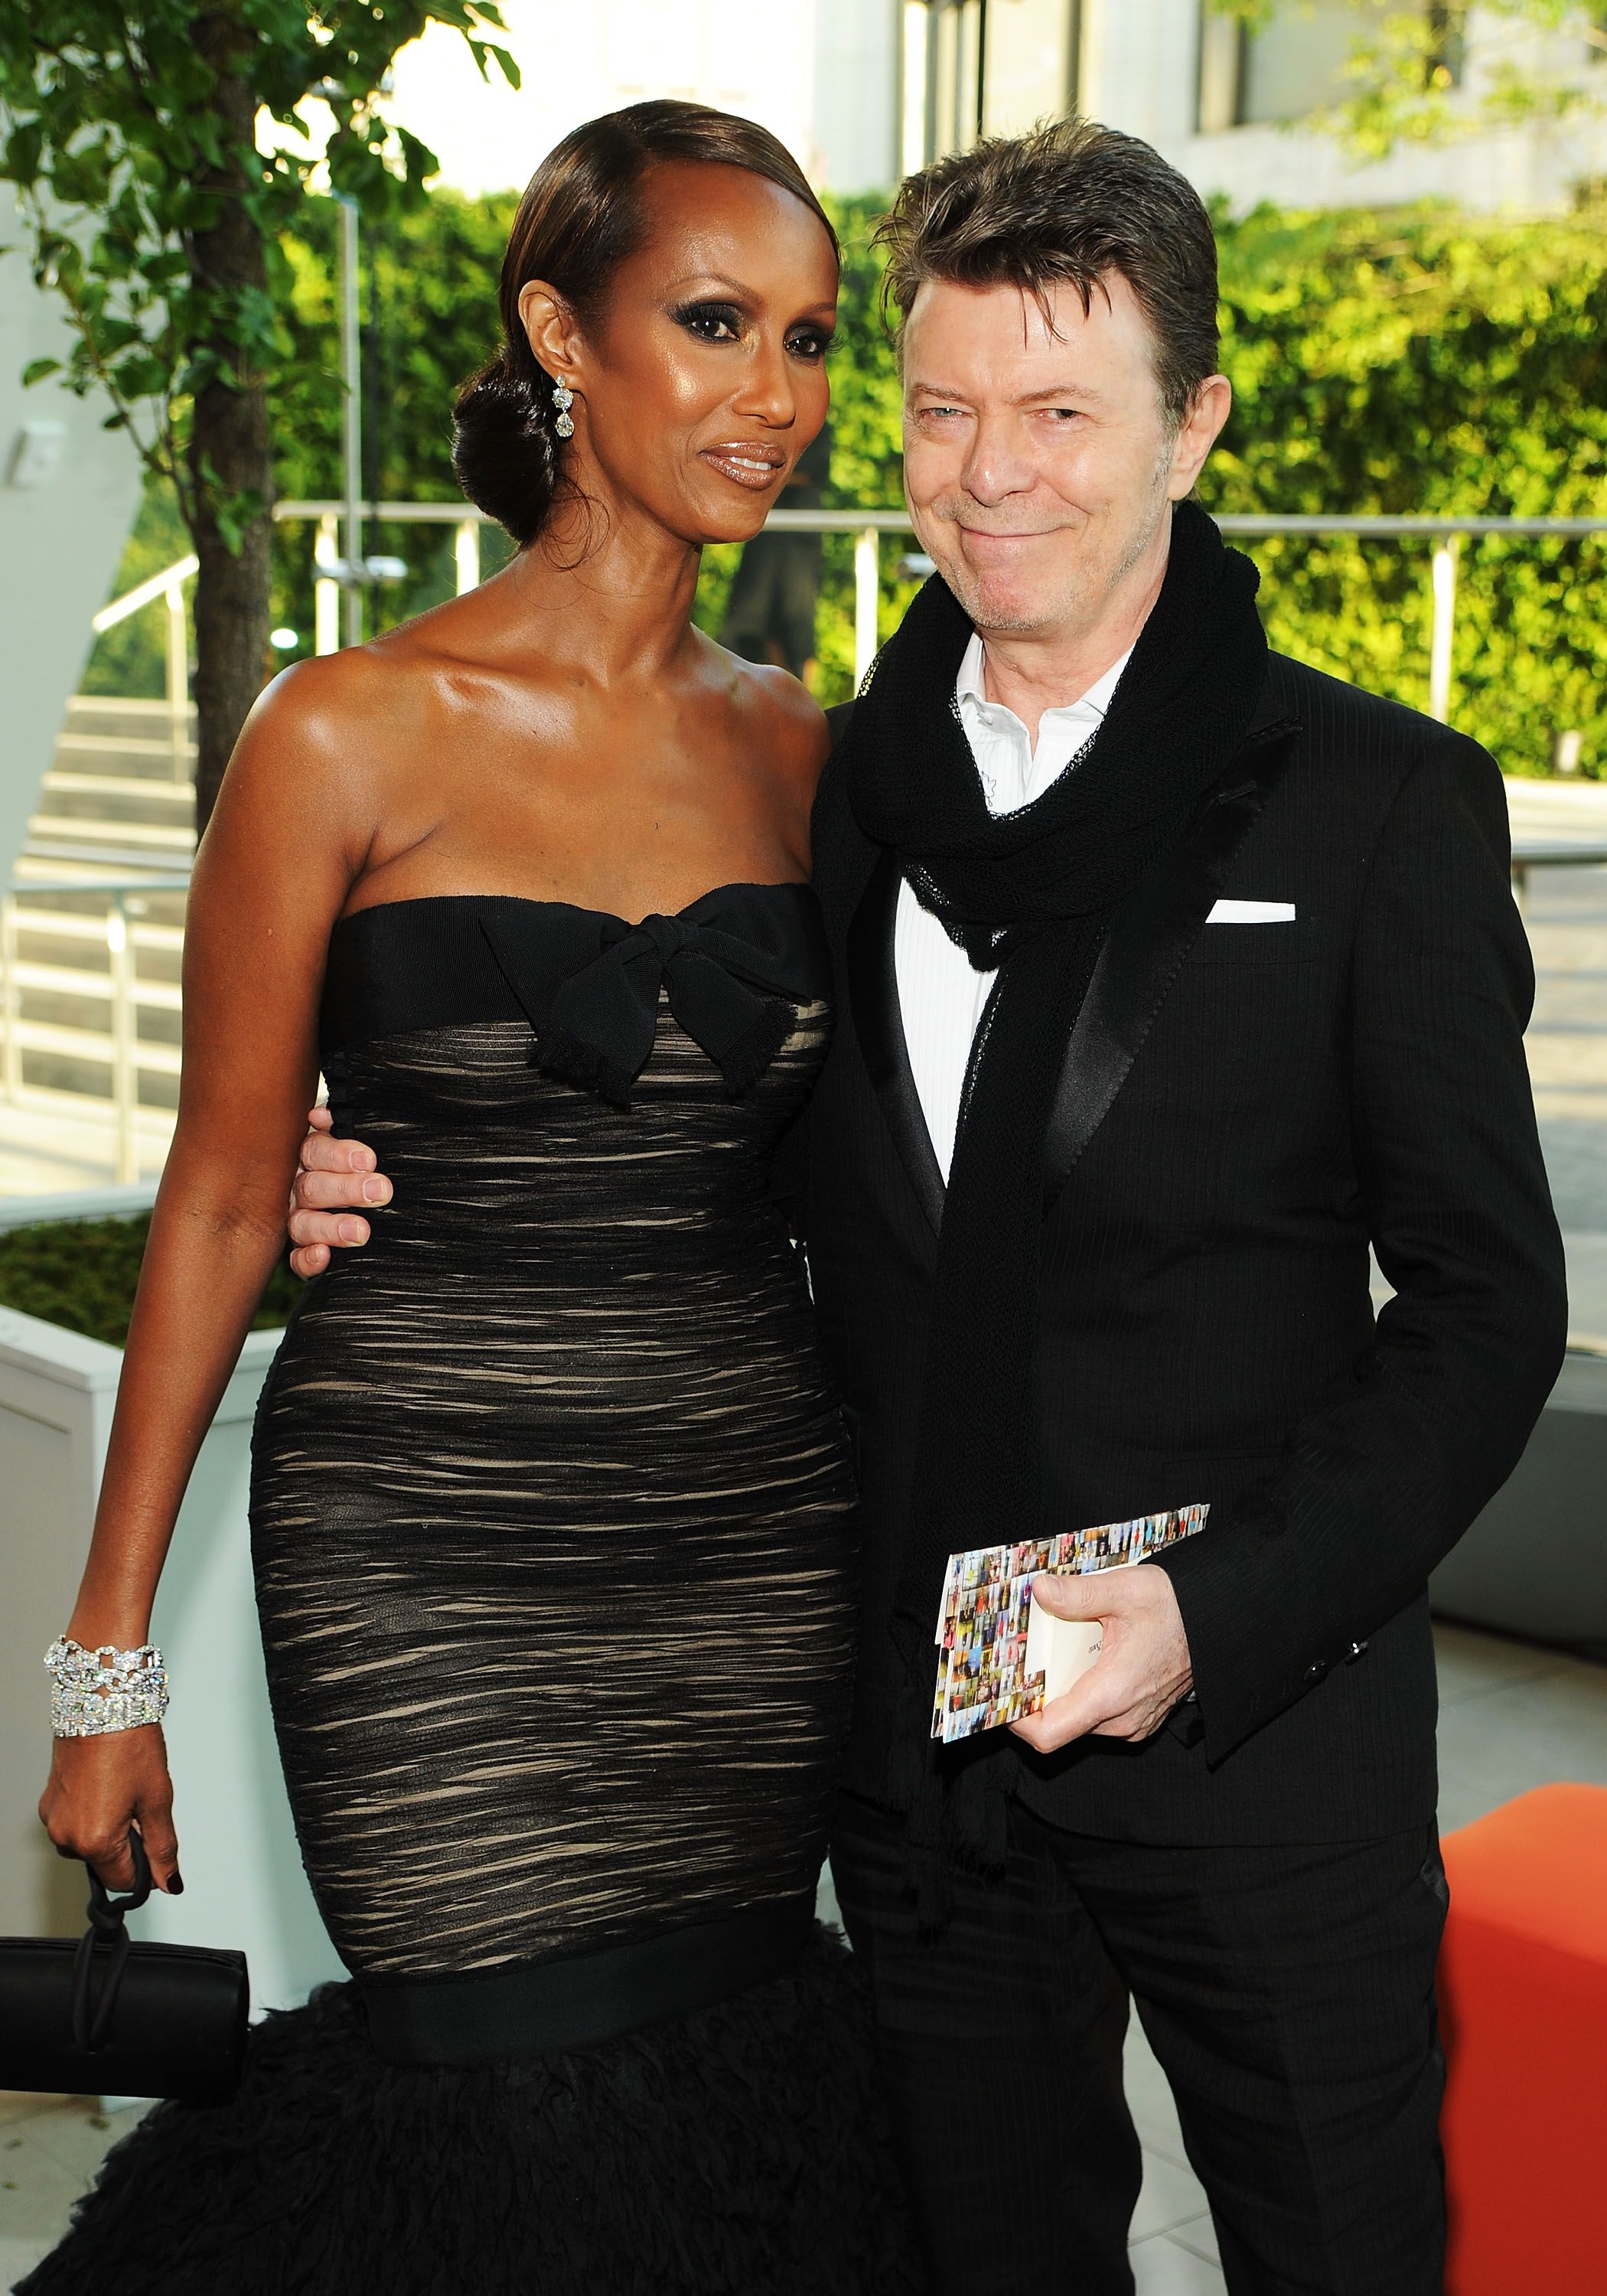 Iman and David Bowie at the 2010 CFDA Fashion Awards in New York City | Source: Dimitrios Kambouris/Getty Images